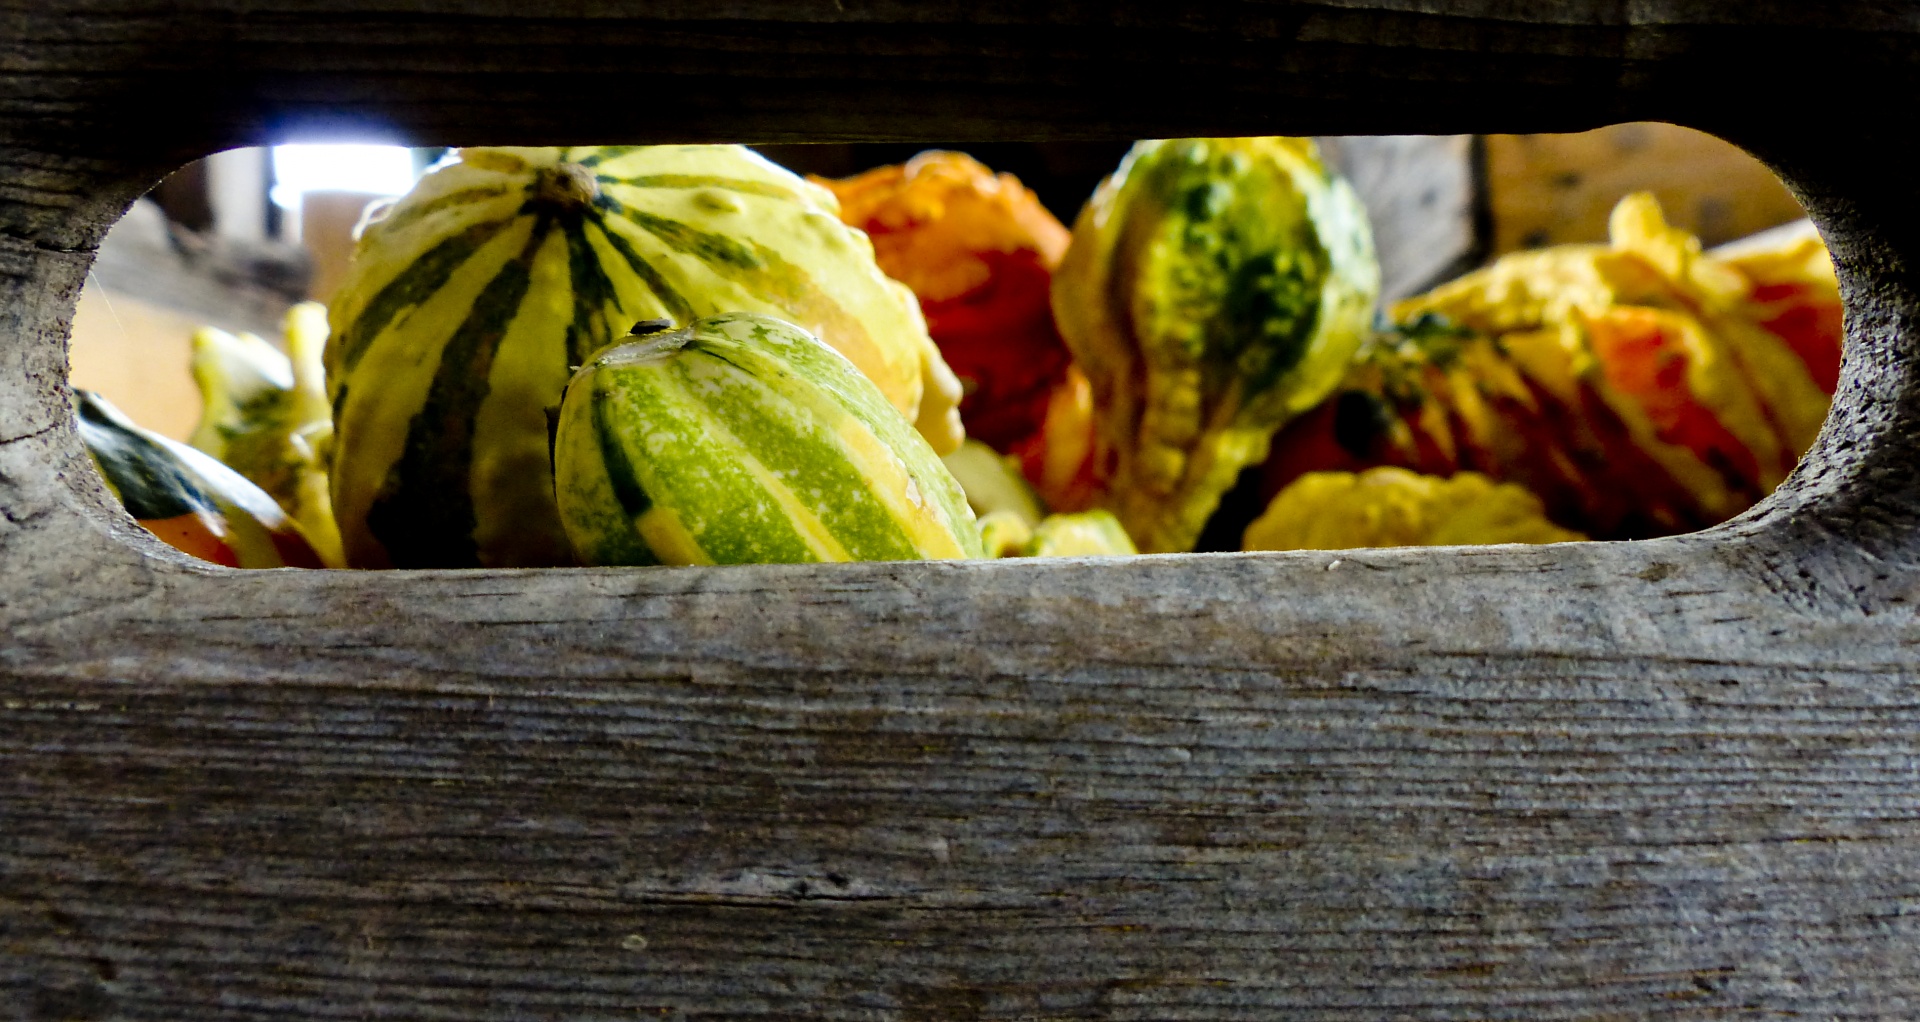 Crate Of Gourds